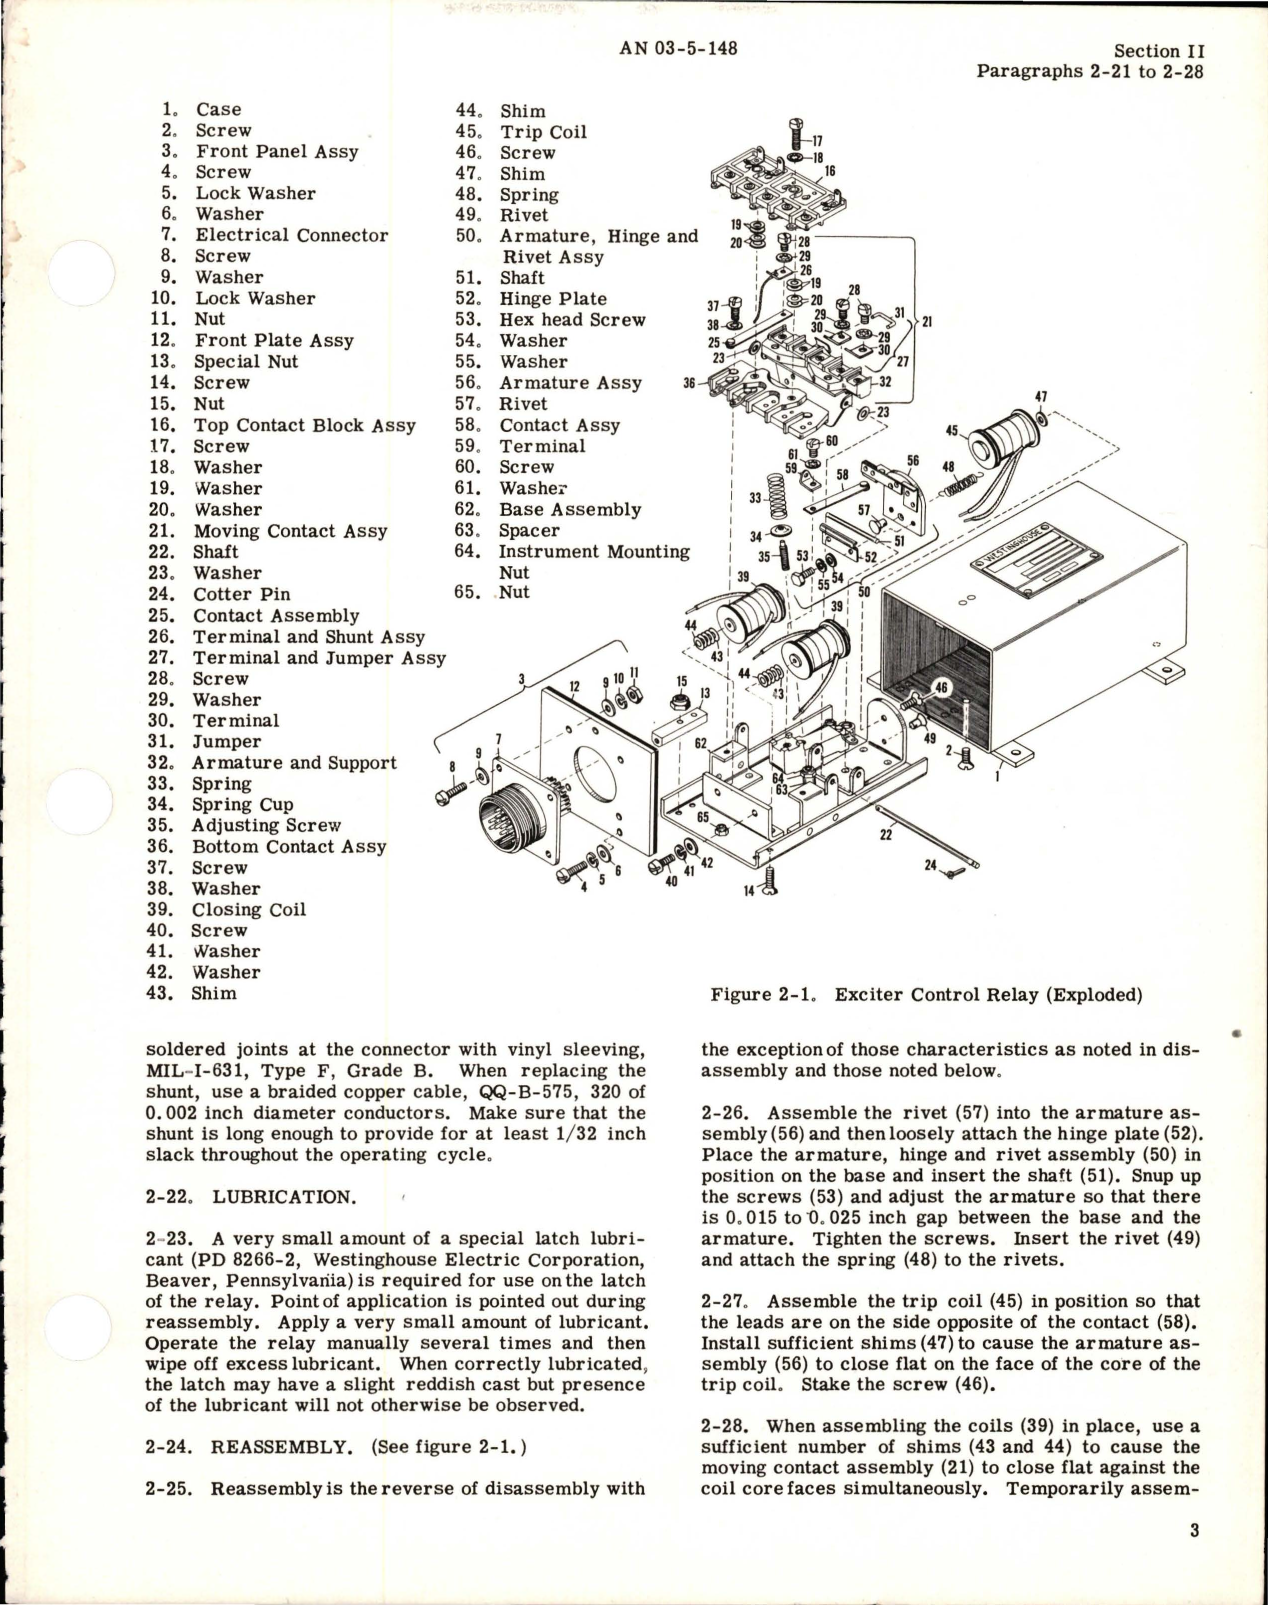 Sample page 5 from AirCorps Library document: Overhaul Instructions for Exciter Control Relay - Type H-1 - Part A24A9280